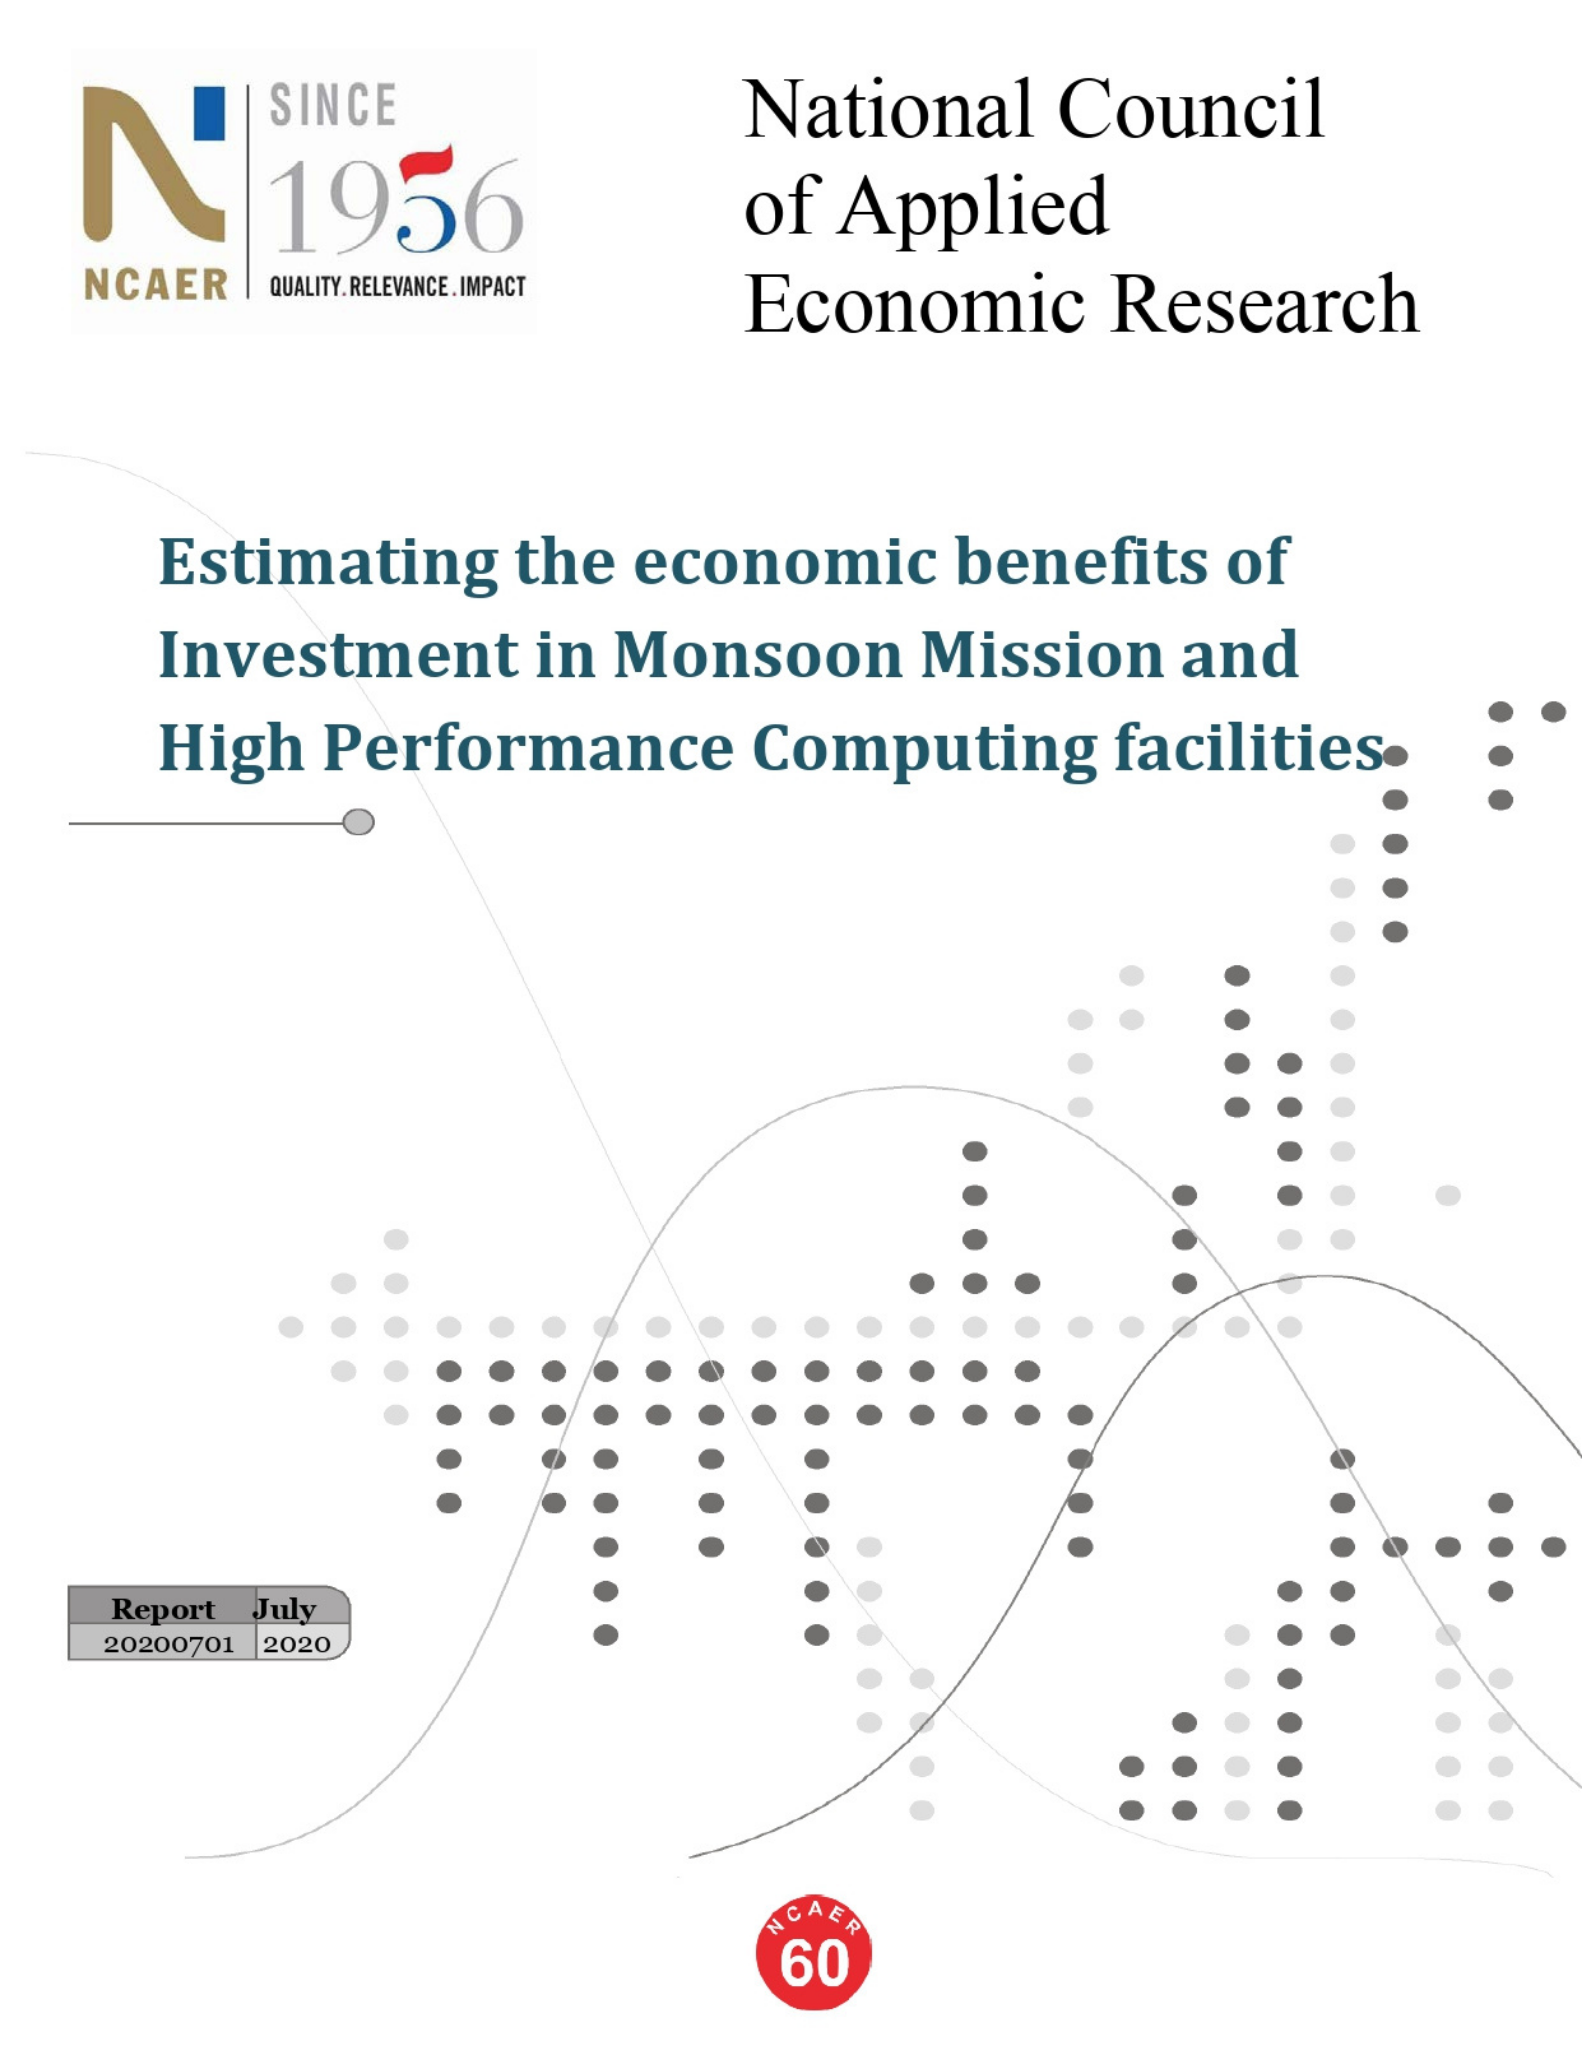 Estimating the economic benefits of Investment in Monsoon Mission and High Performance Computing facilities